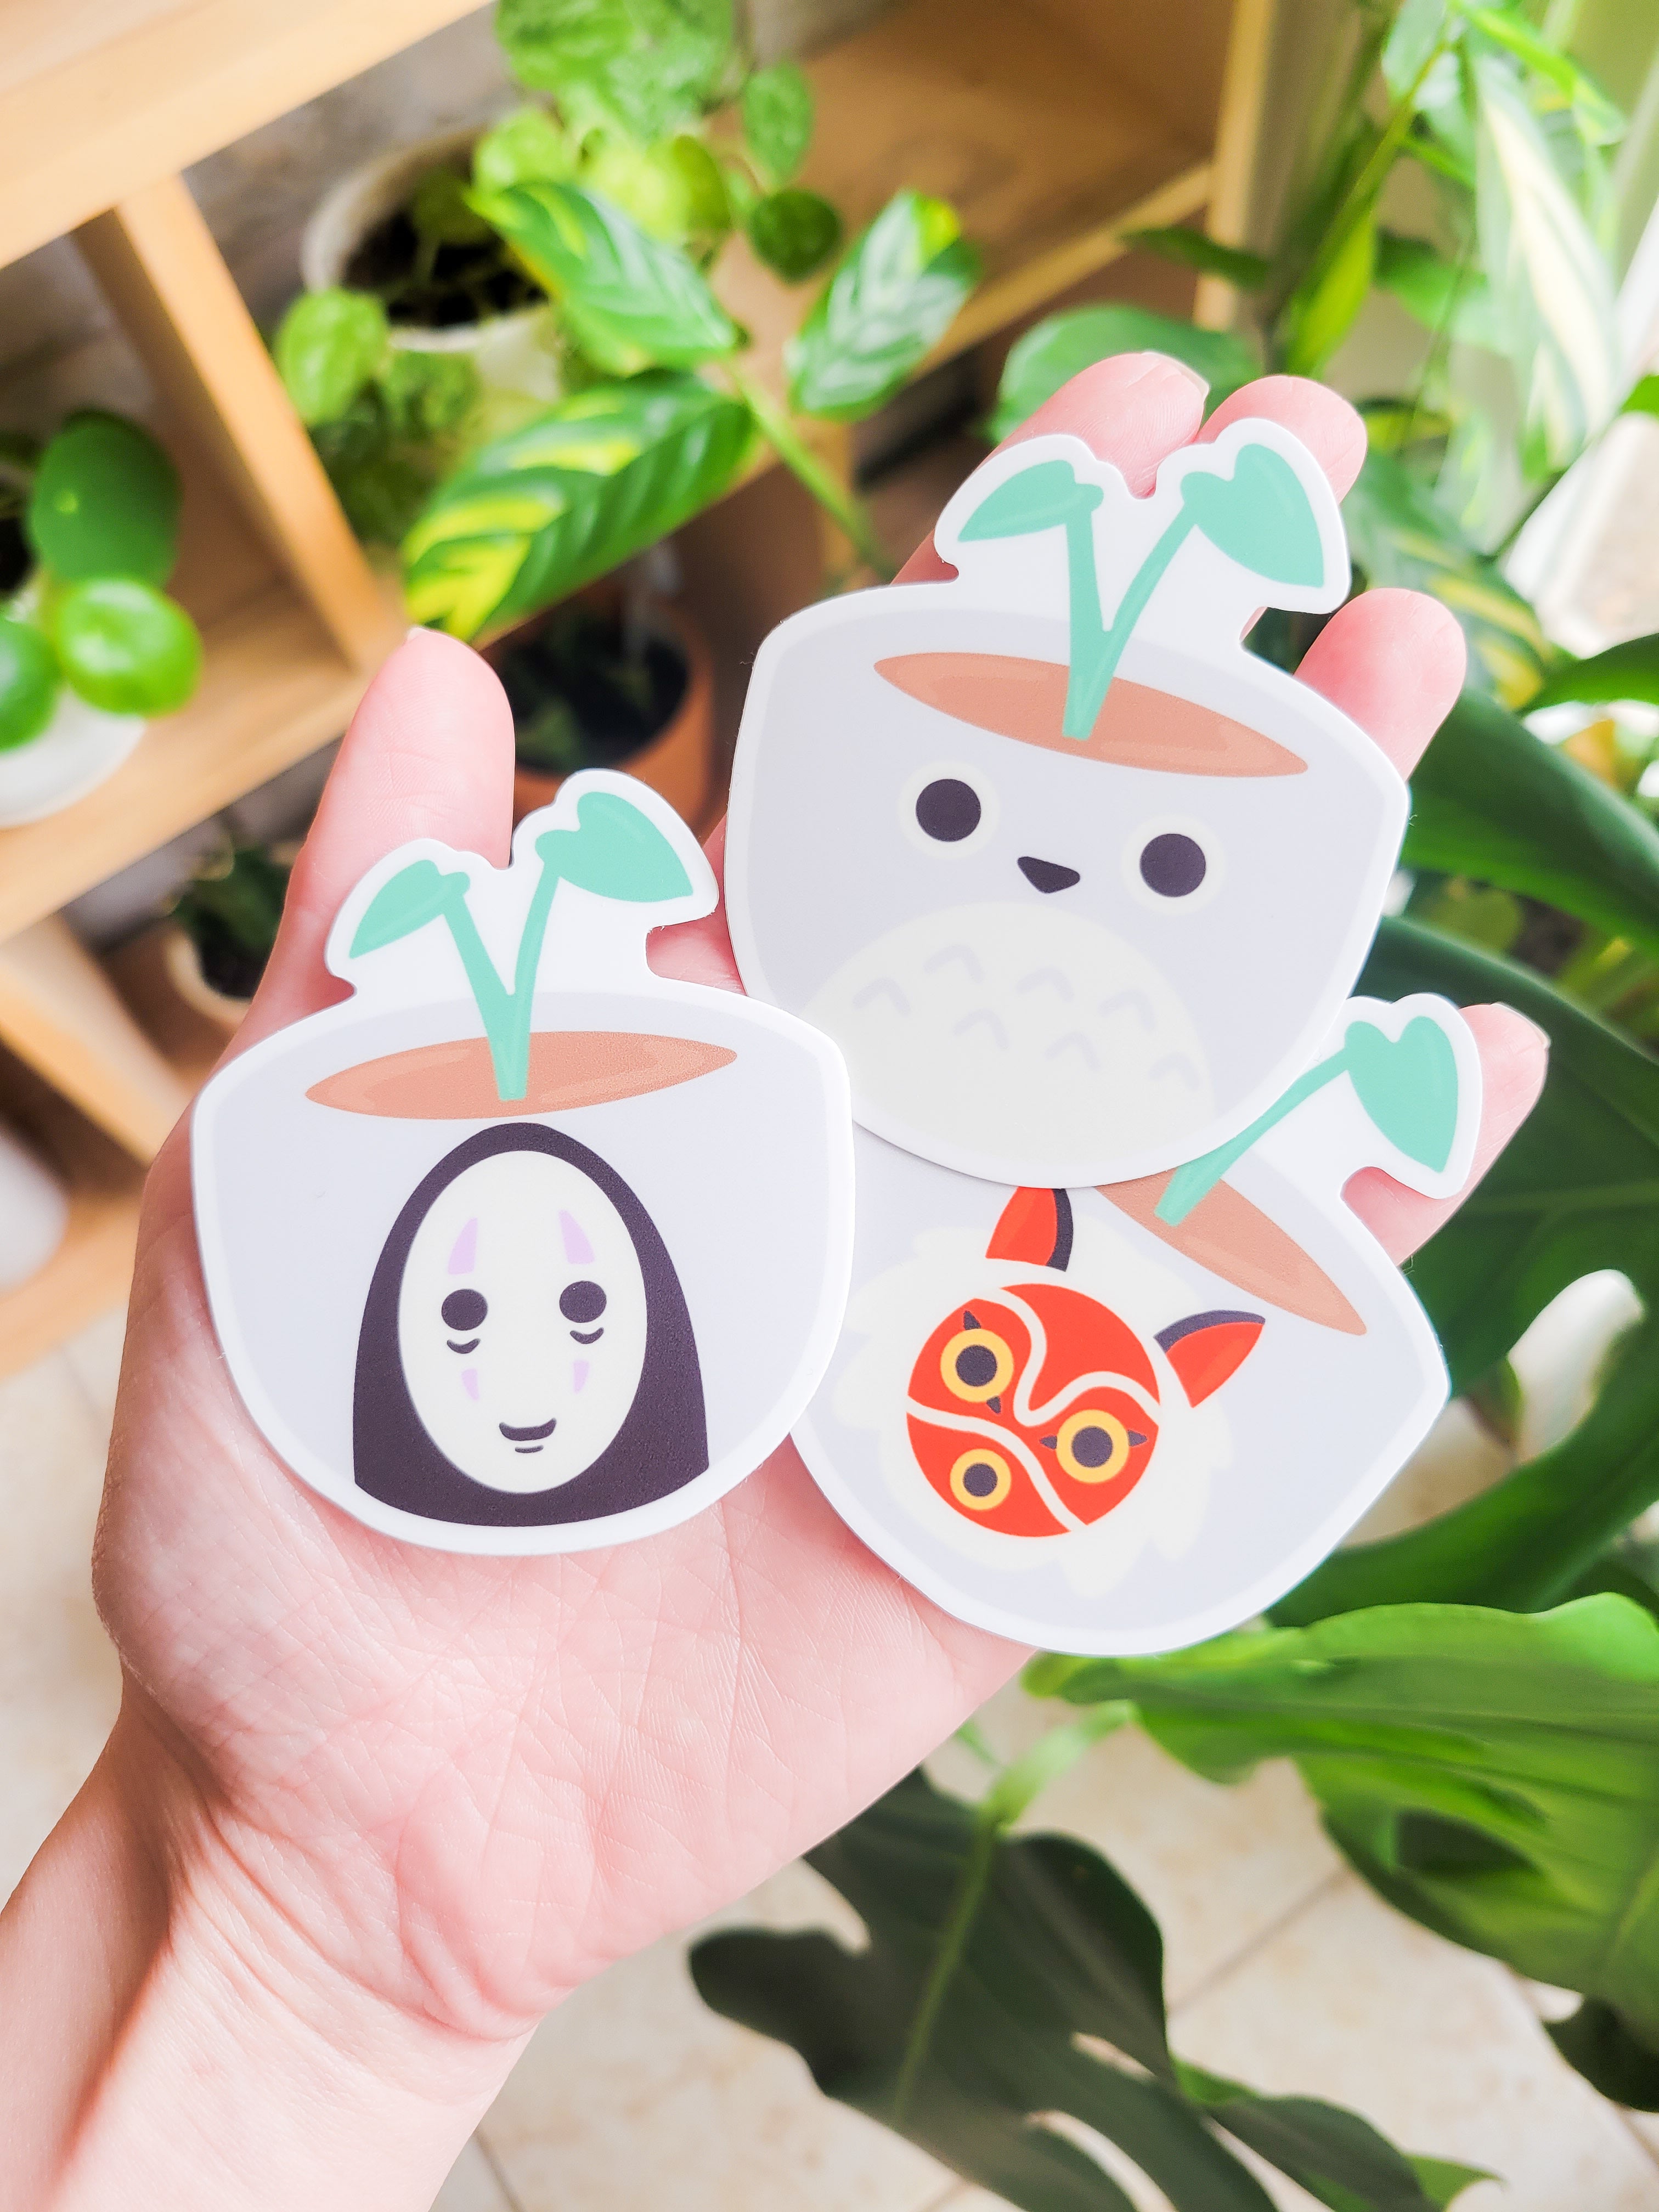 Cute Character Planter Stickers